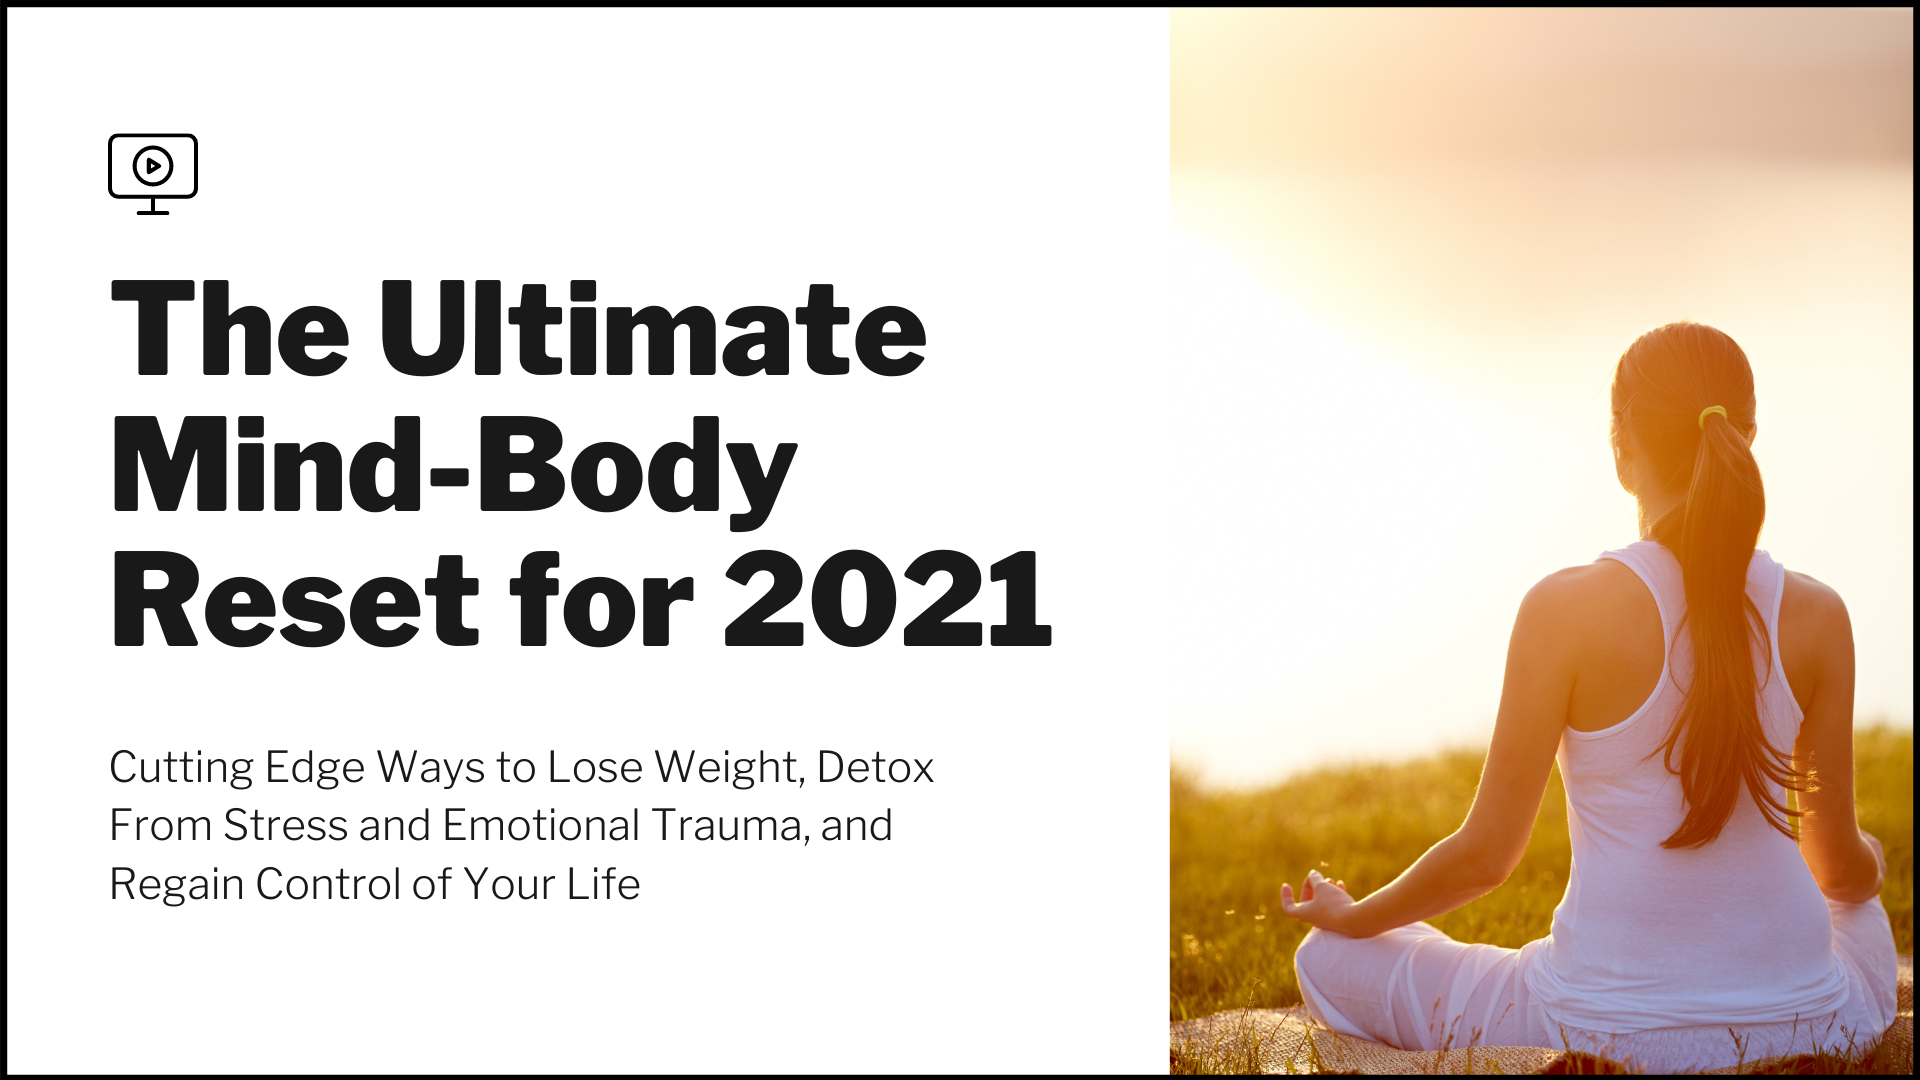 The Ultimate Mind-Body Reset for 2021: Cutting Edge Ways to Lose Weight, Detox From Stress and Emotional Trauma, and Regain Control of Your Life